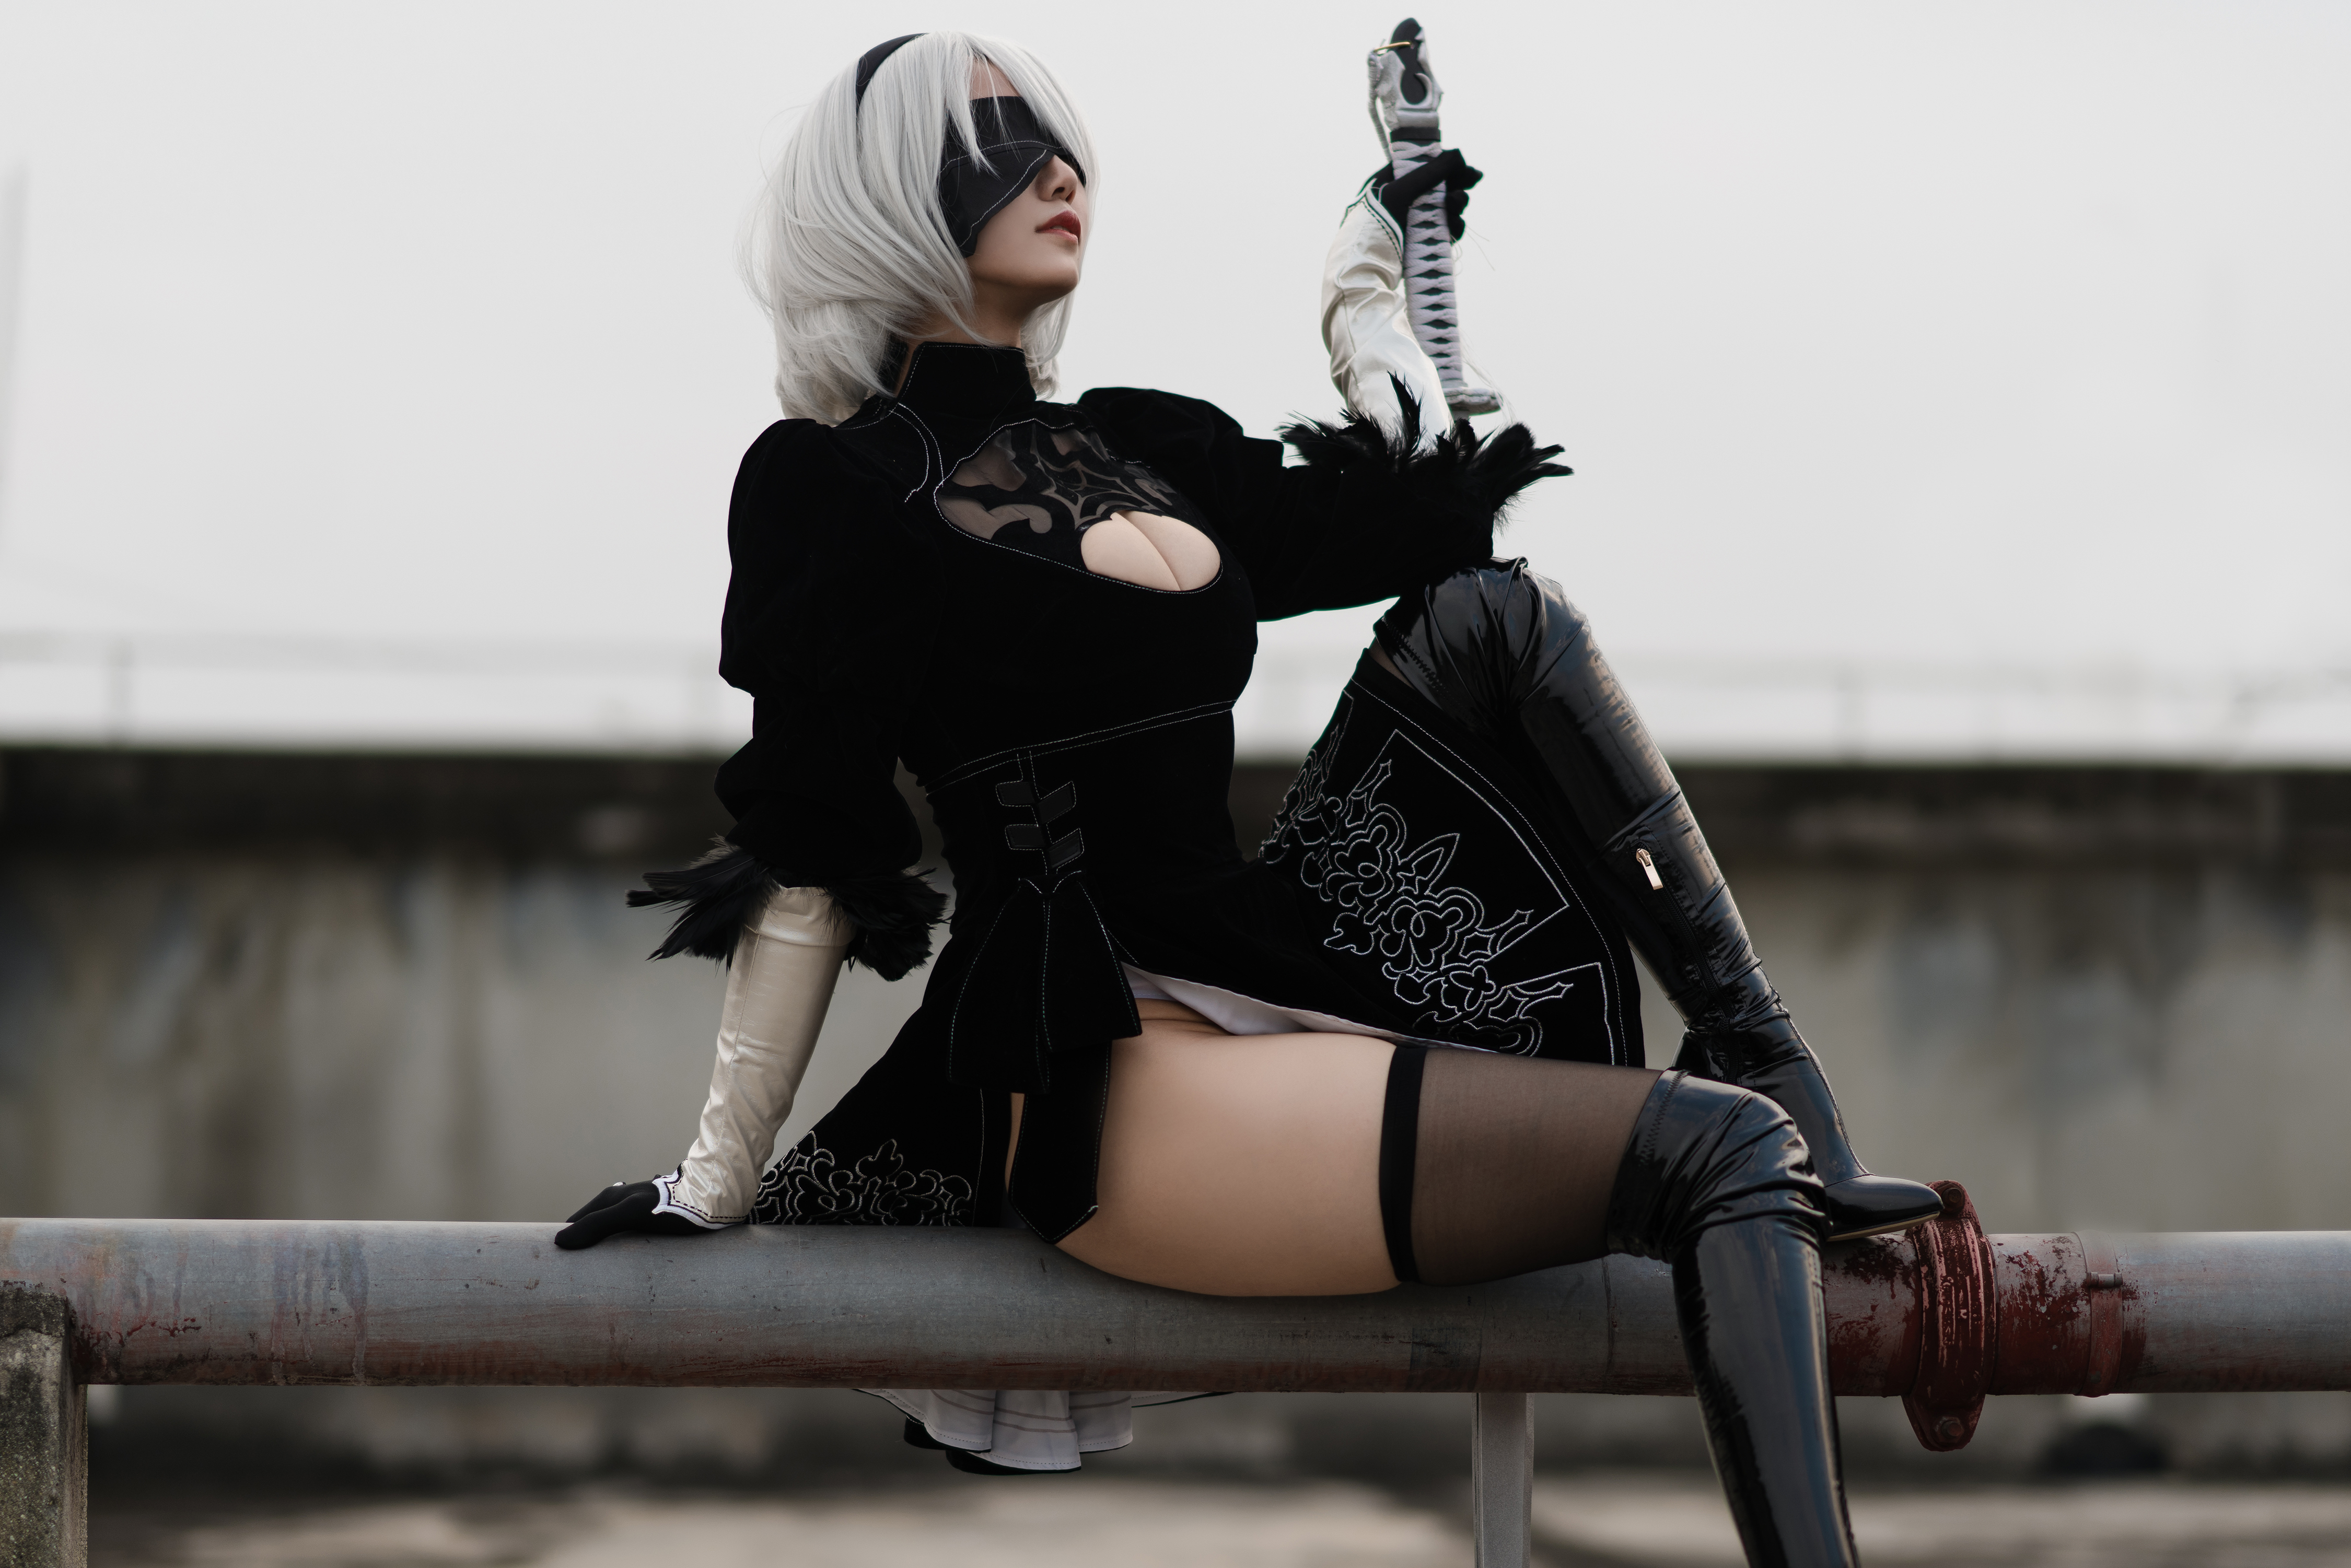 People 4500x3002 Yummy Chiyo women model Asian cosplay 2B (Nier: Automata) Nier: Automata video games video game girls white hair dress black dress thighs lingerie stockings black stockings knee-high boots sword outdoors women outdoors eyepatches cleavage gloves rooftops latex boots